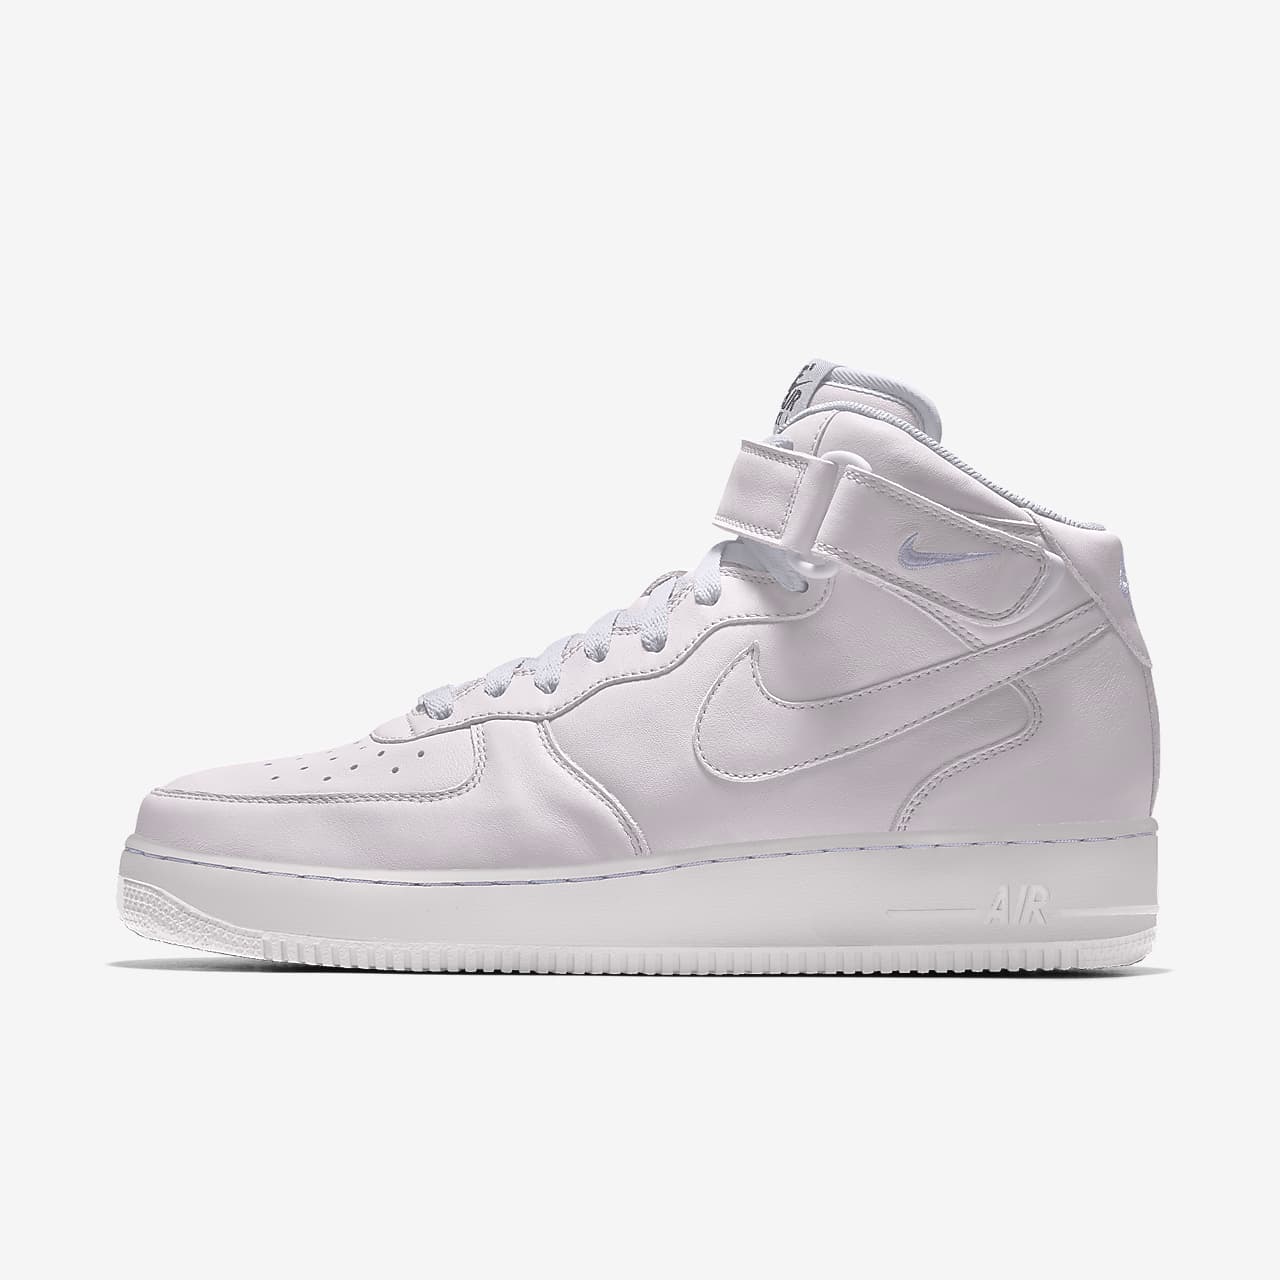 Nike Air Force 1 Mid By You 专属定制男子运动鞋